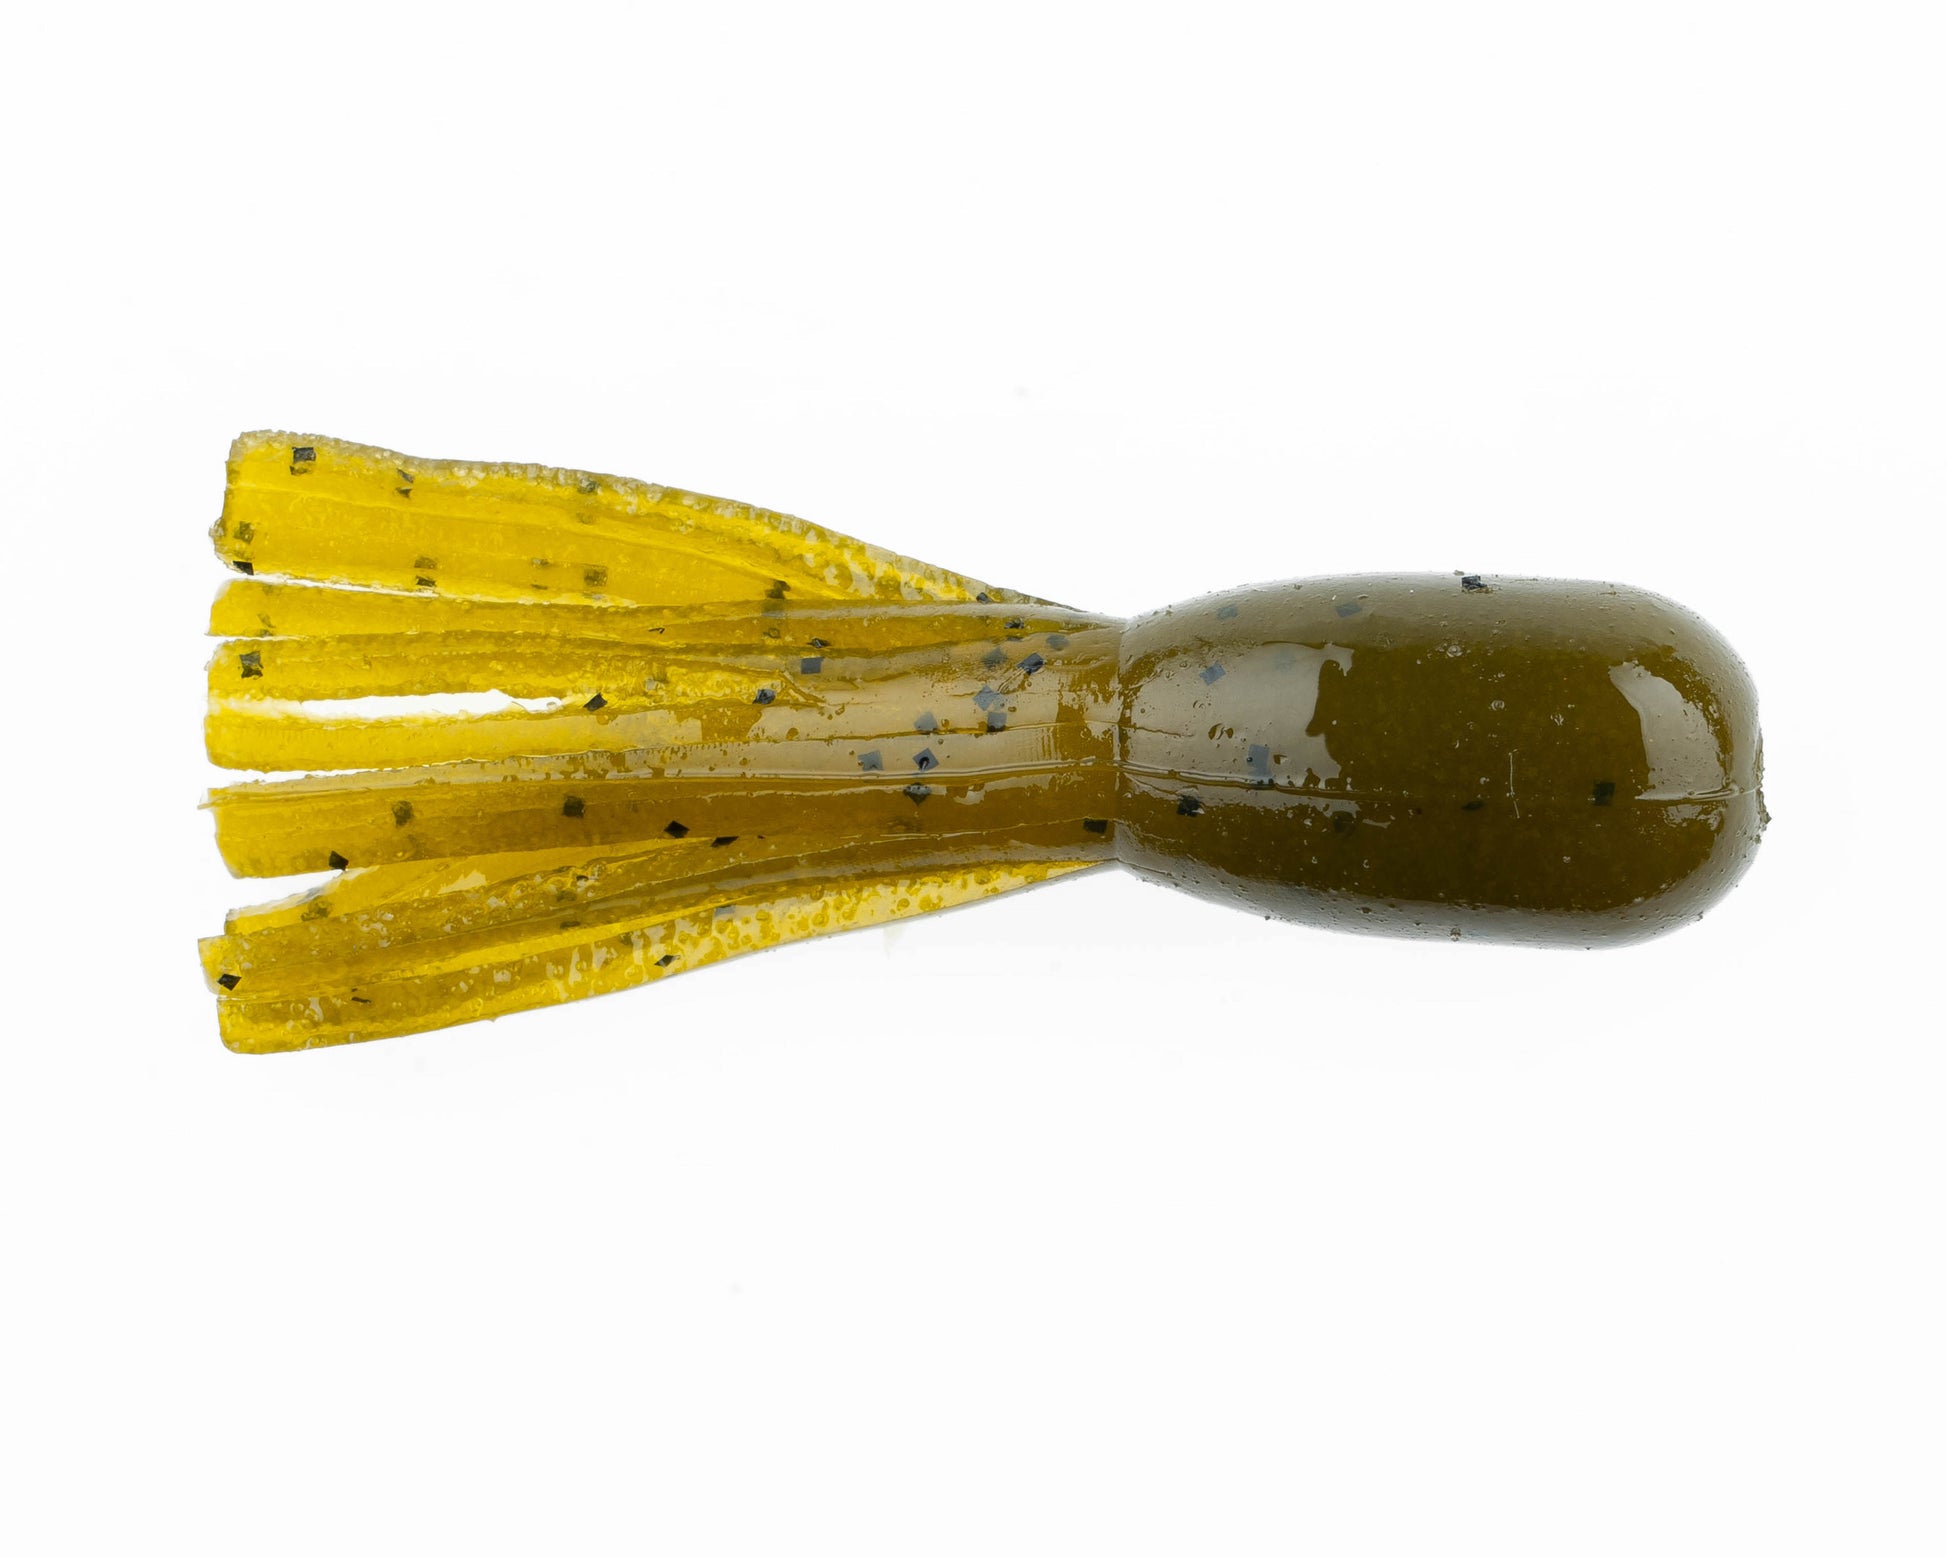 NetBait Tube 2.5 – Tight Lines Tackle